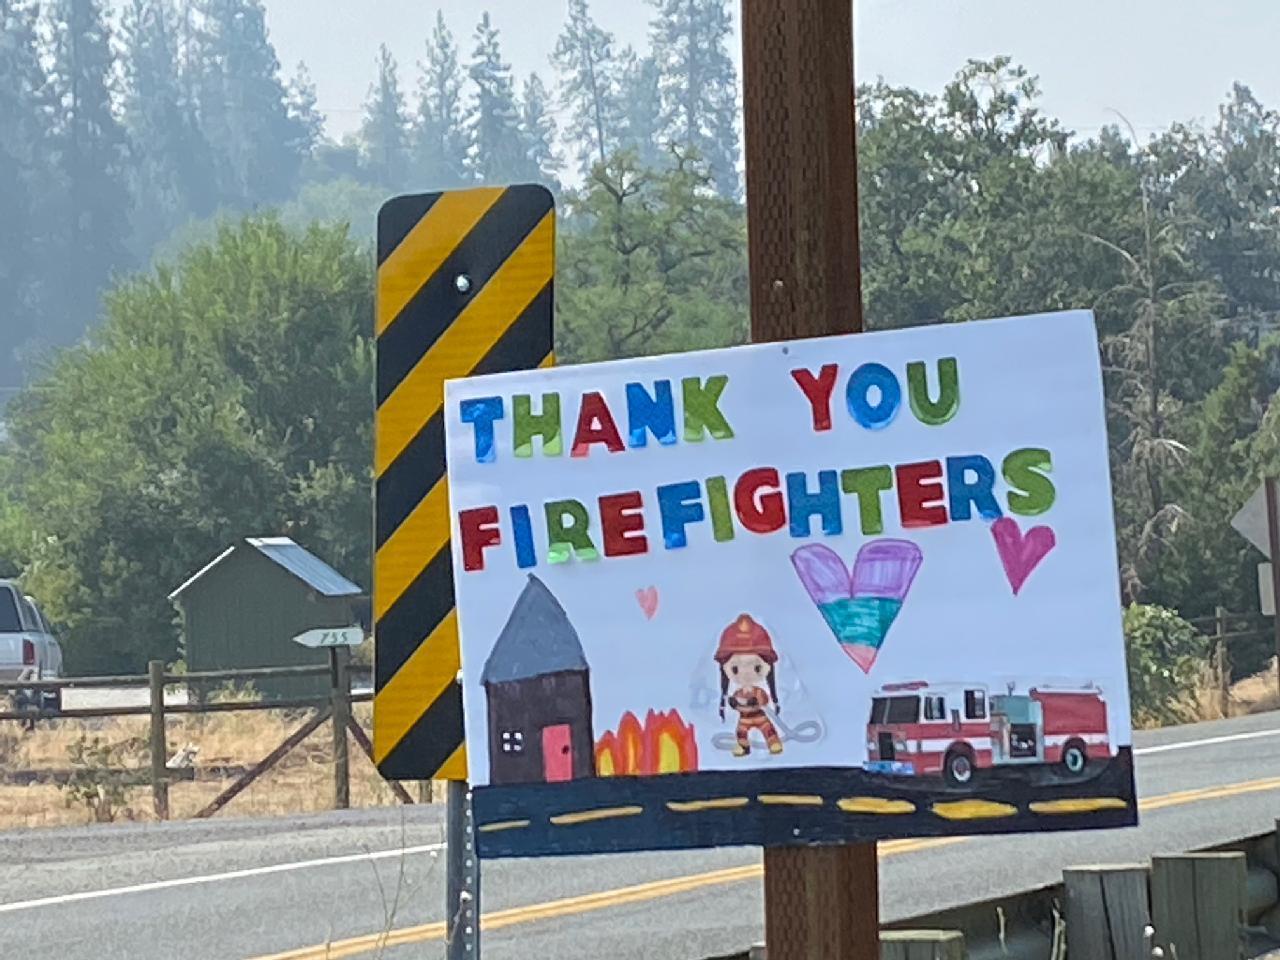 Firefighters never get tired of gestures of appreciation!